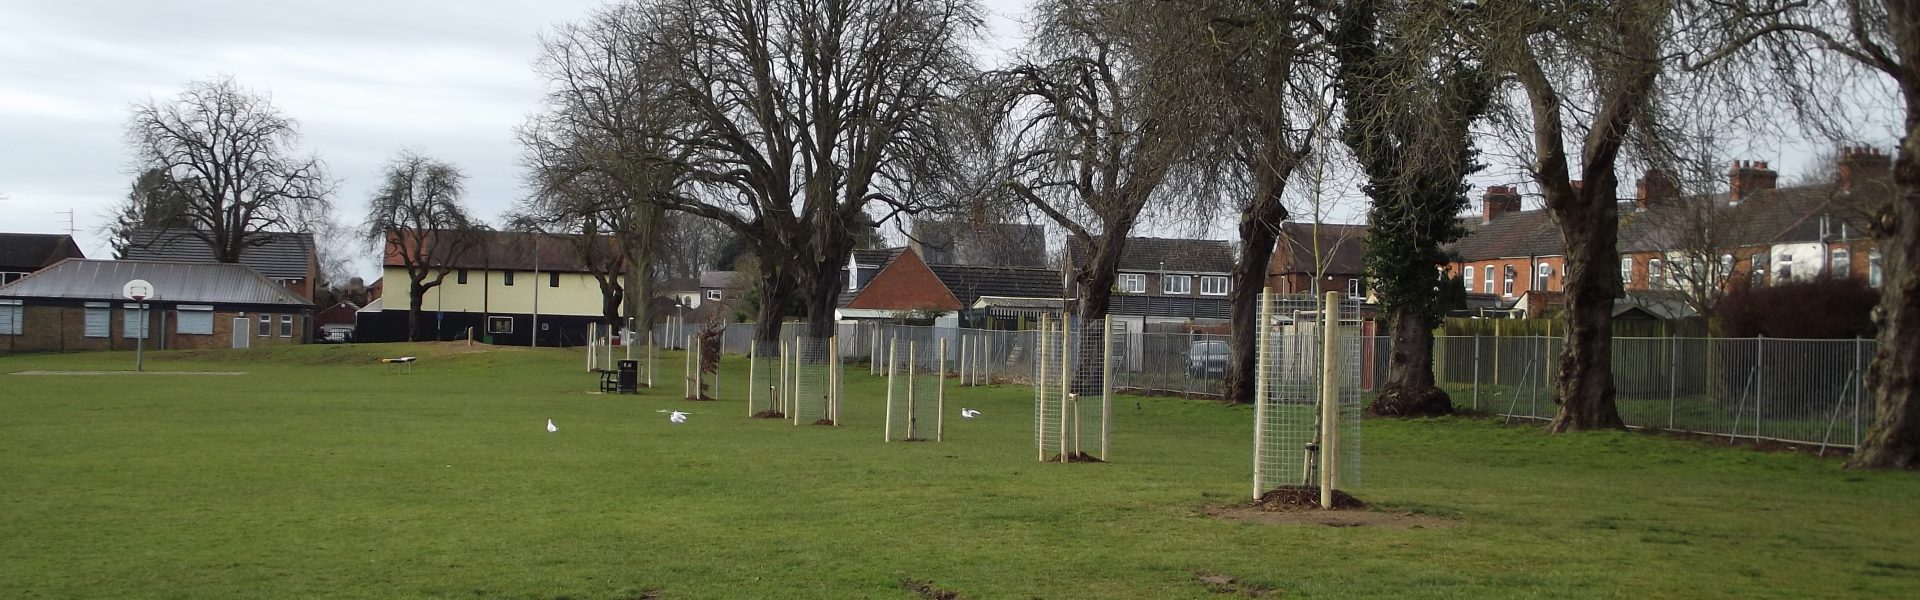 New trees planted in Dunkirk Avenue Recreation ground